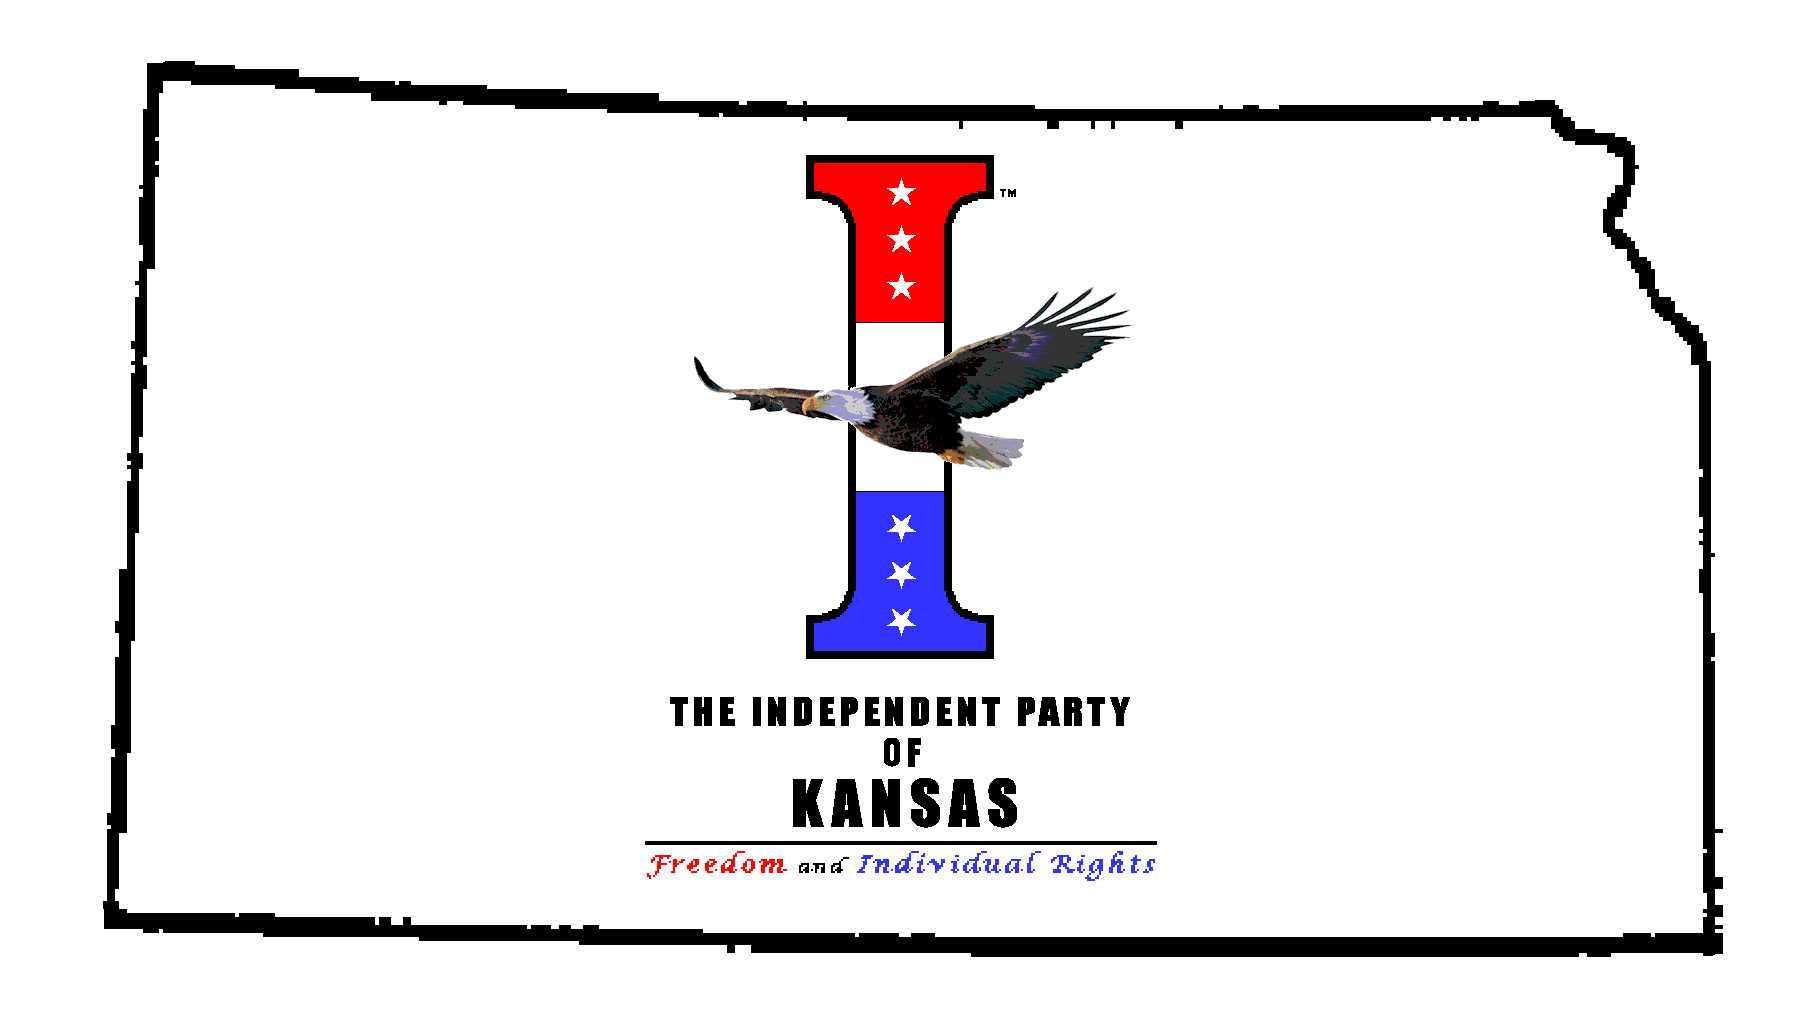 The Independent Party of Kansas!